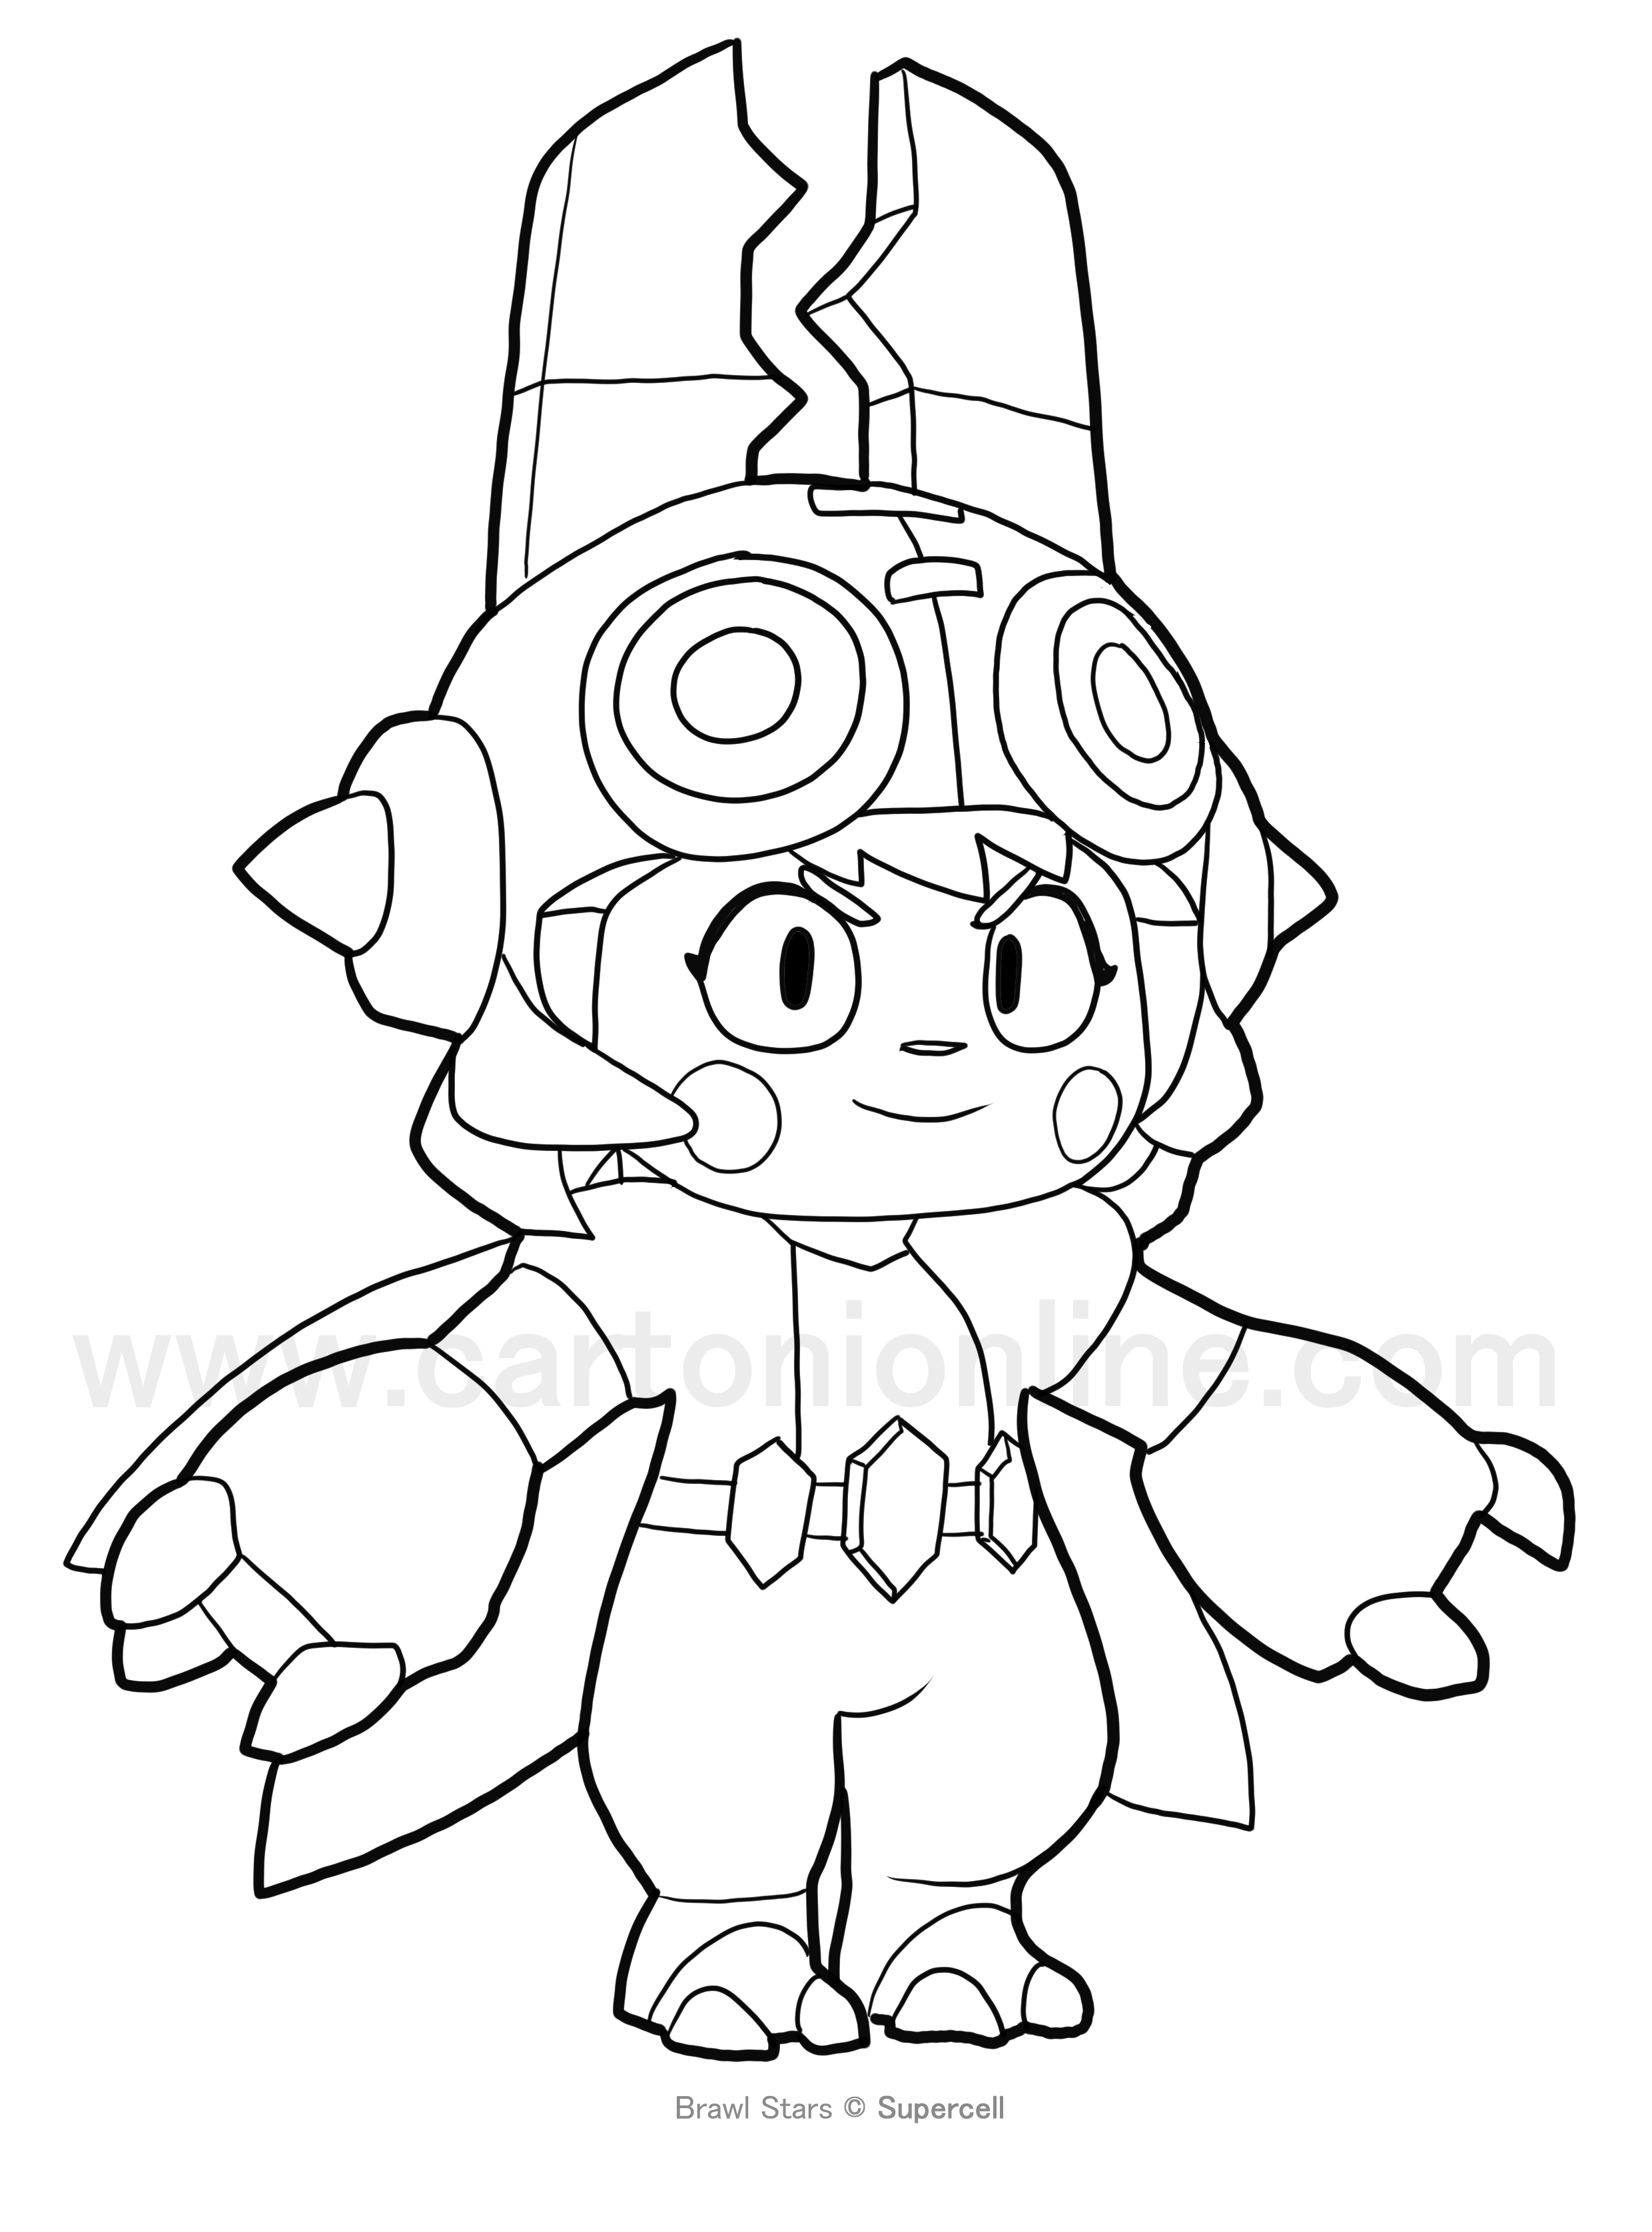 Mega Beetle Bea from Brawl Stars coloring page to print and coloring